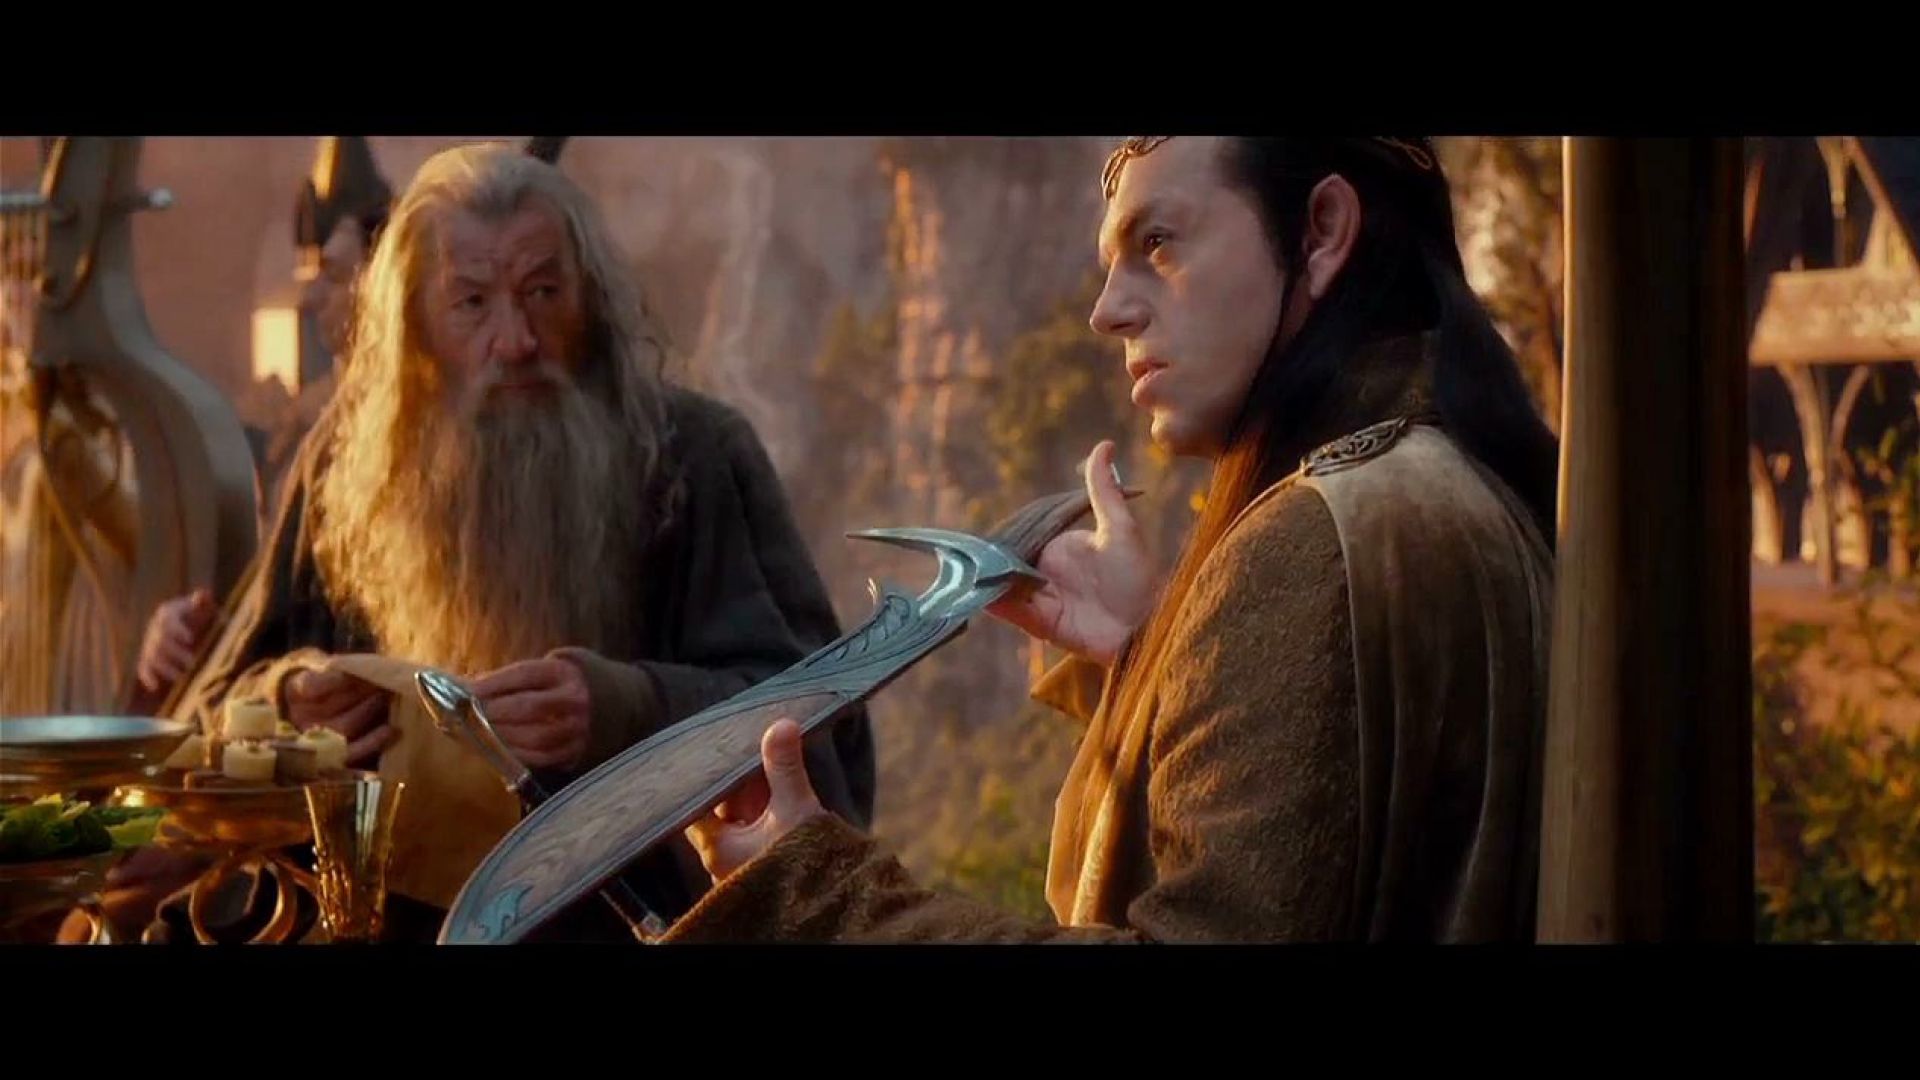 I&#039;m not actually sure it is a sword. More of a letter opener really. The Hobbit: An Unexpected Journey